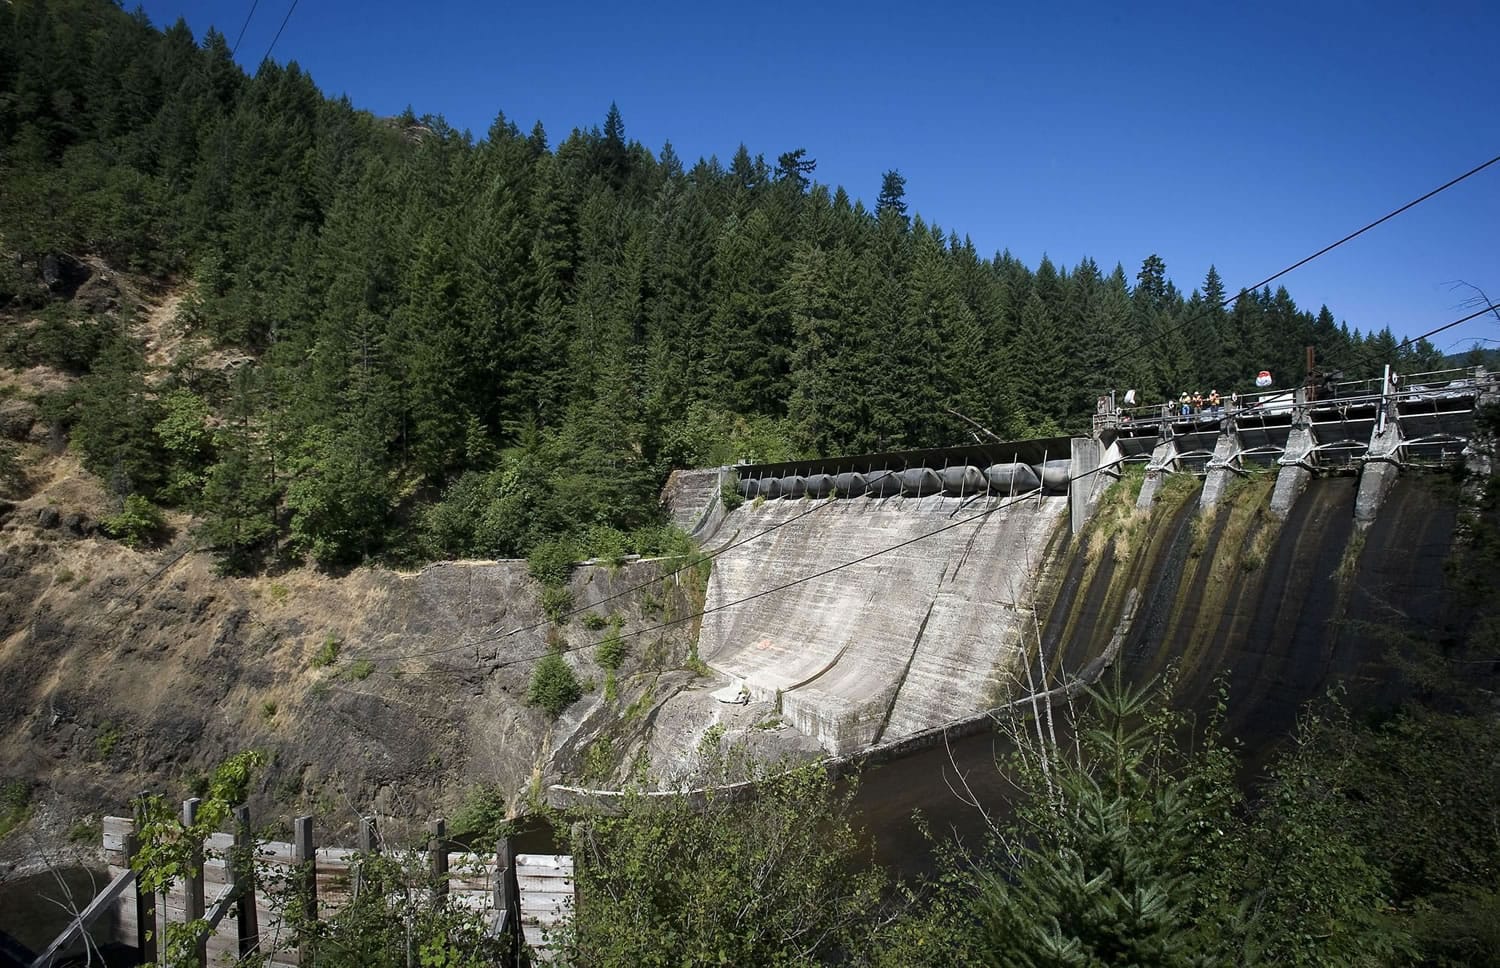 Condit Dam has blocked passage of salmon and steelhead on the White Salmon River since 1913.